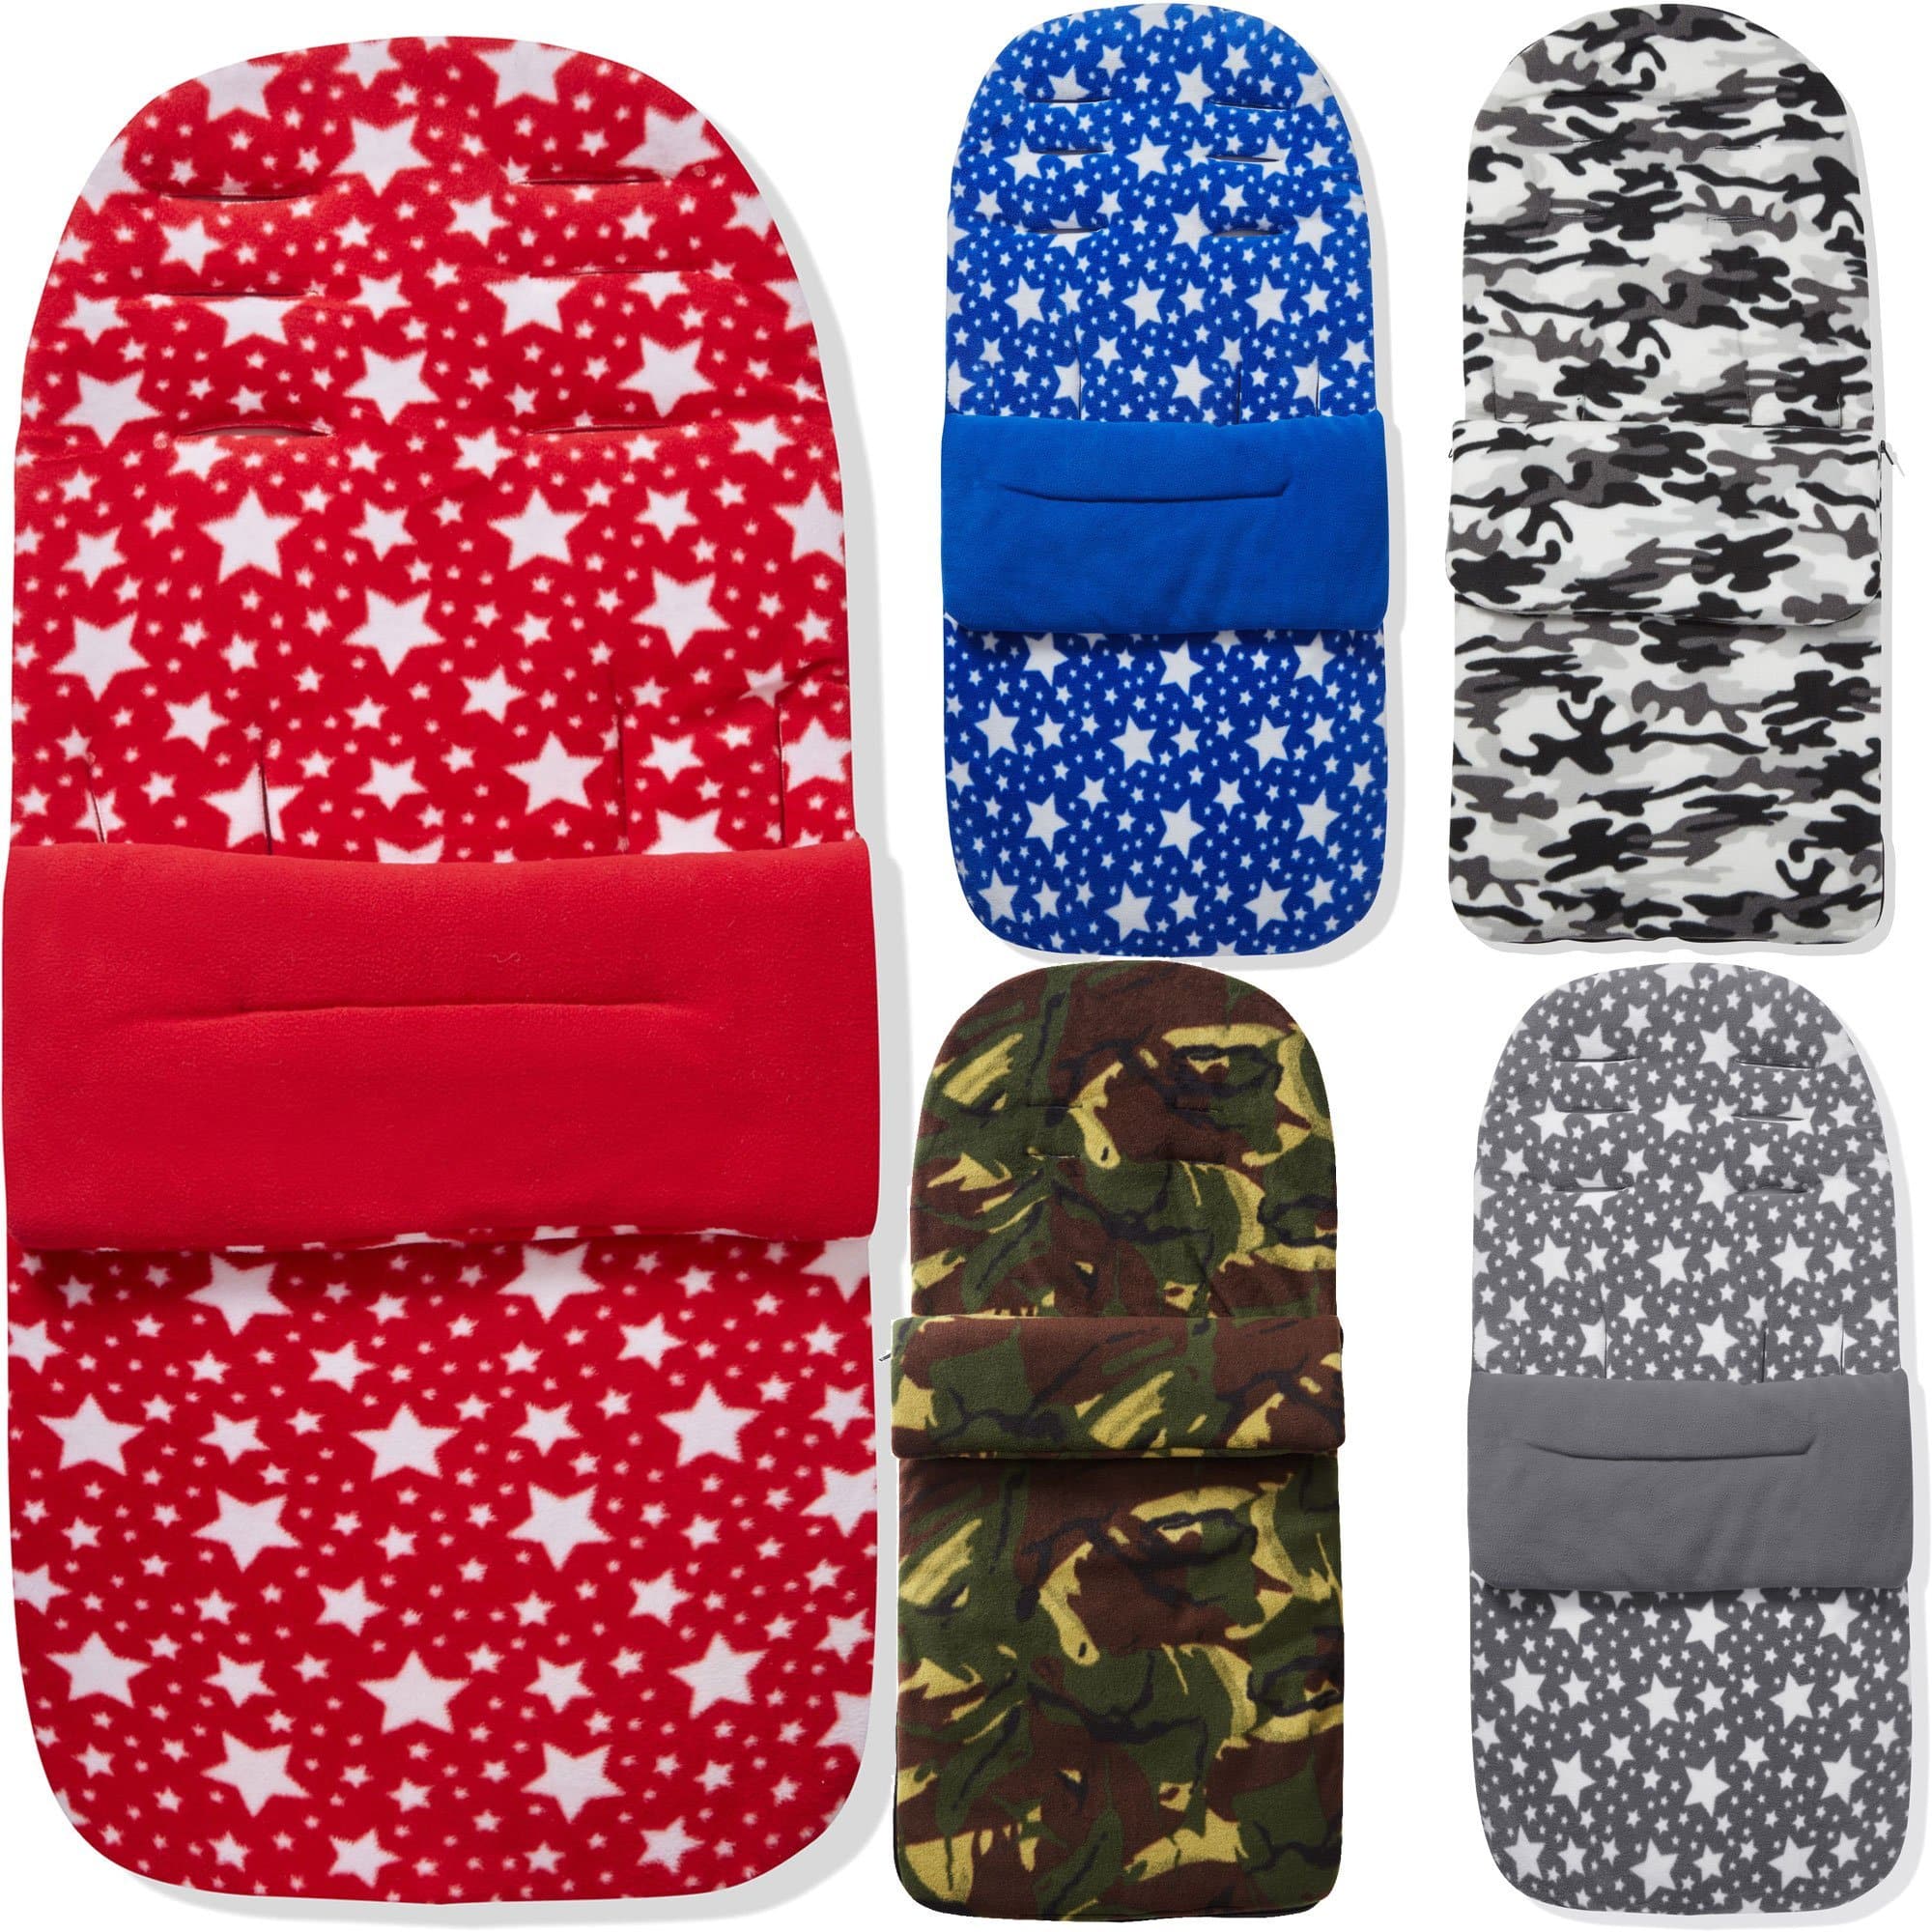 Fleece Footmuff / Cosy Toes Compatible with Mima -  | For Your Little One